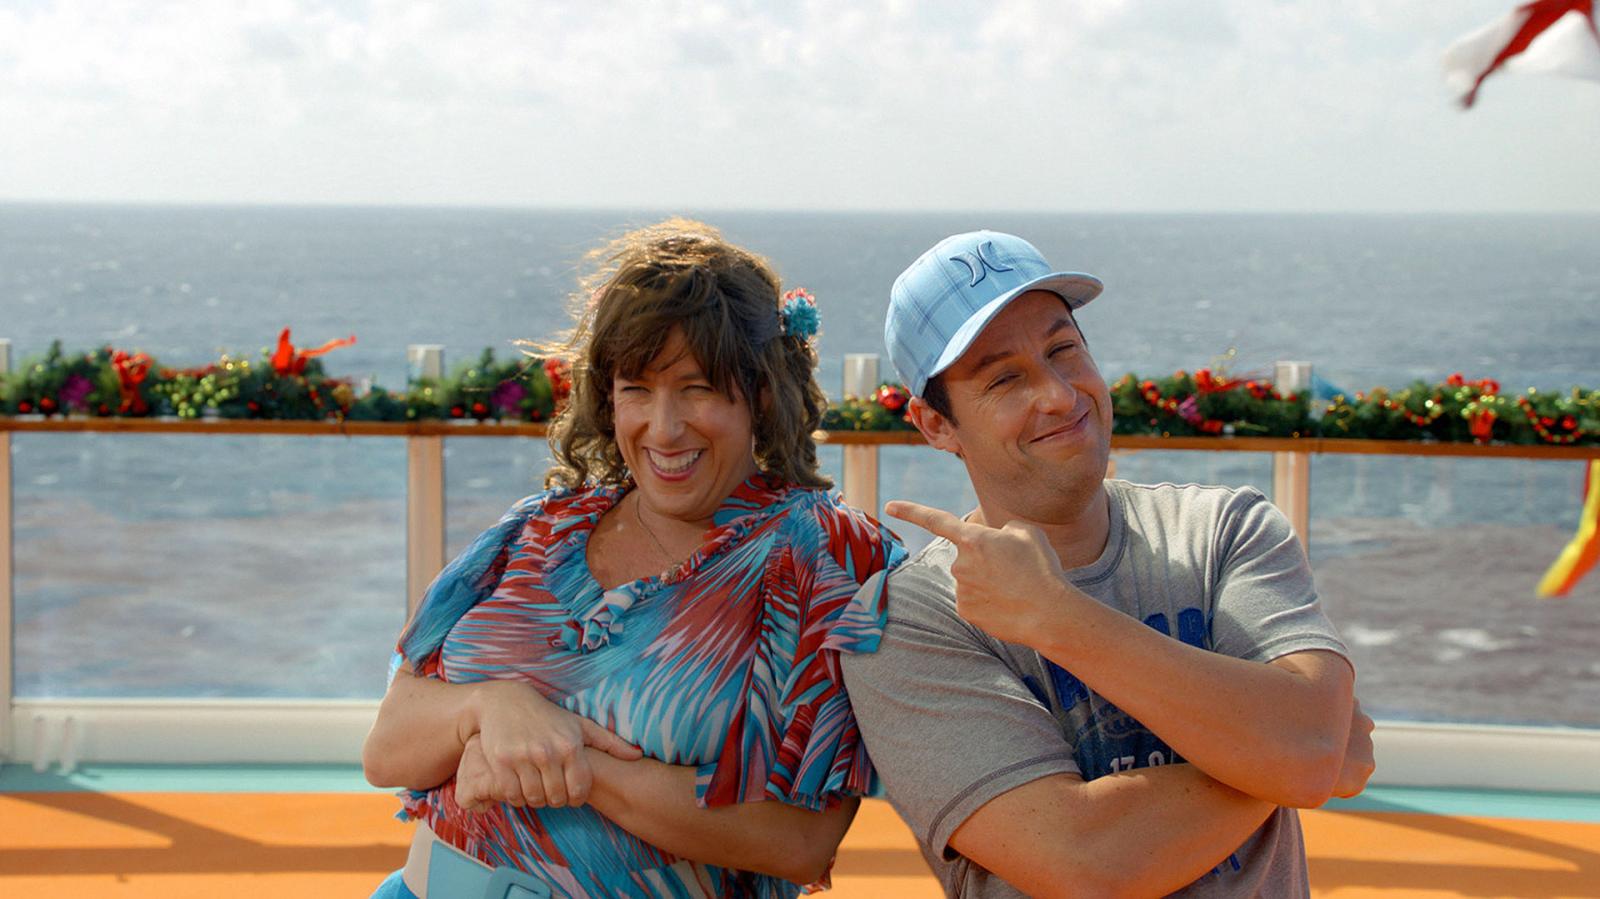 8 Worst Adam Sandler Movies, Ranked From Bad to Absolute Disaster - image 6